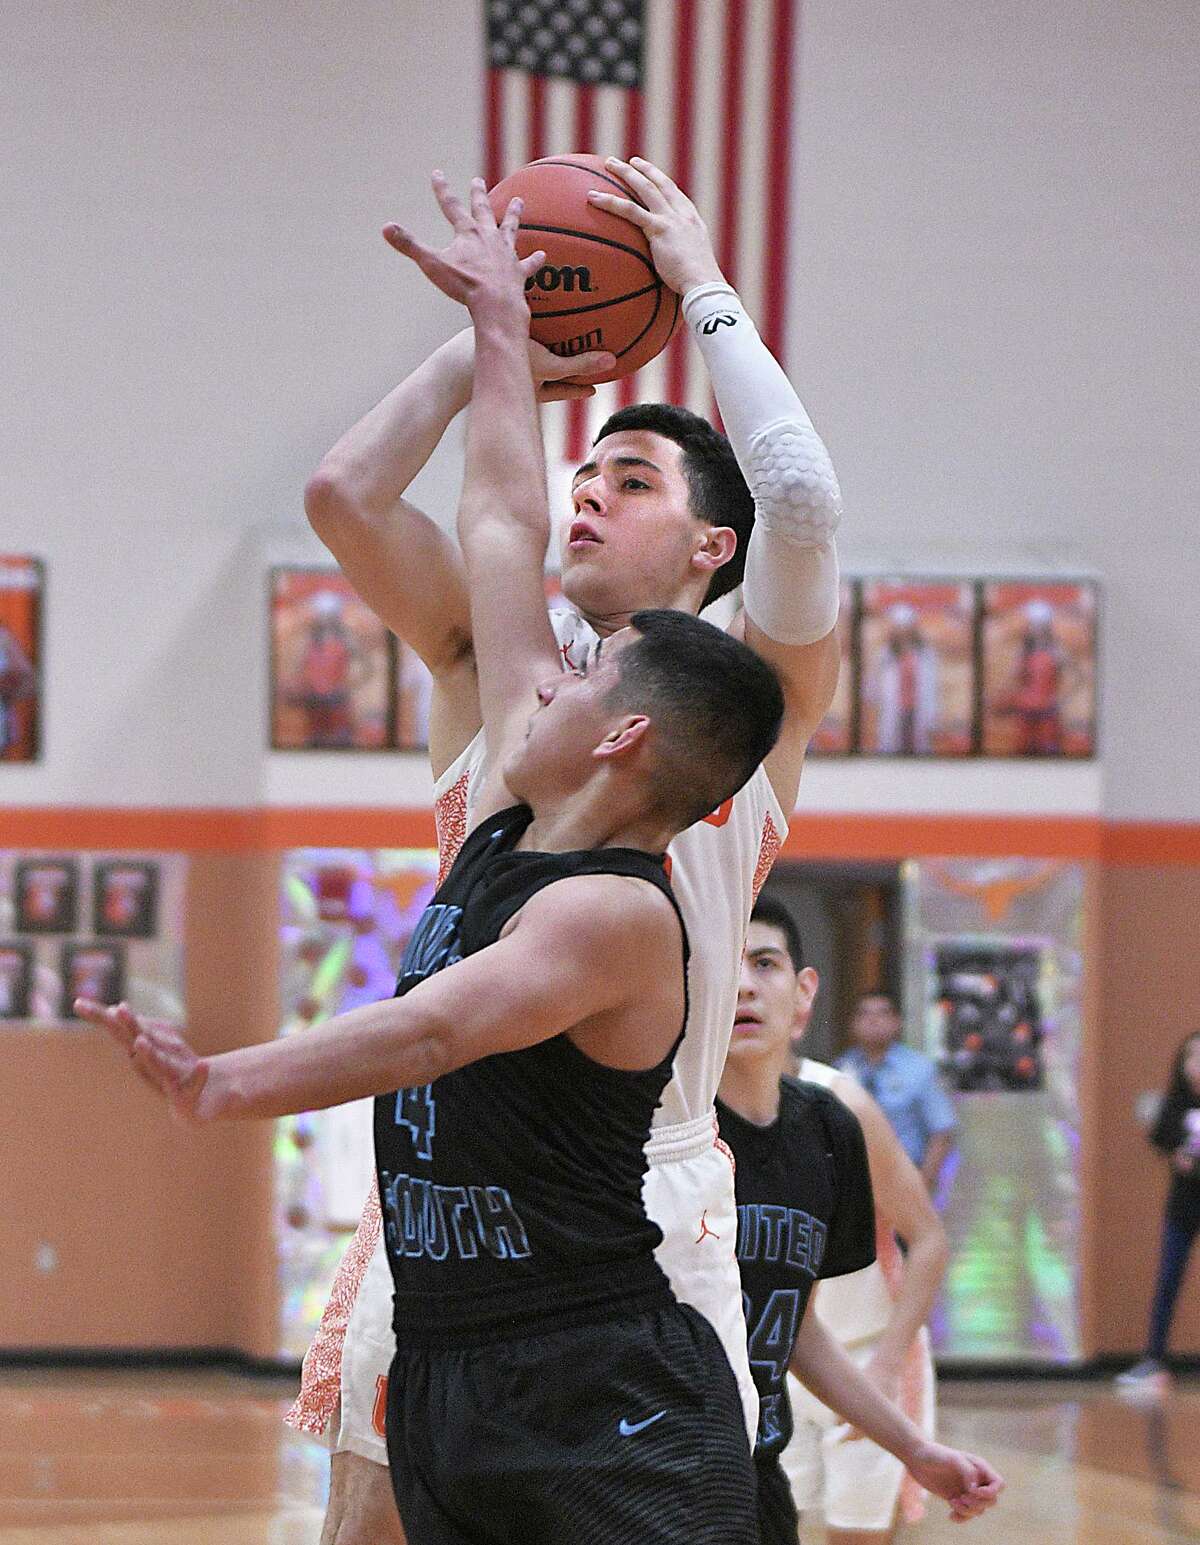 Alex Idrogo scored 14 points in United’s 72-64 win over United South on Tuesday.